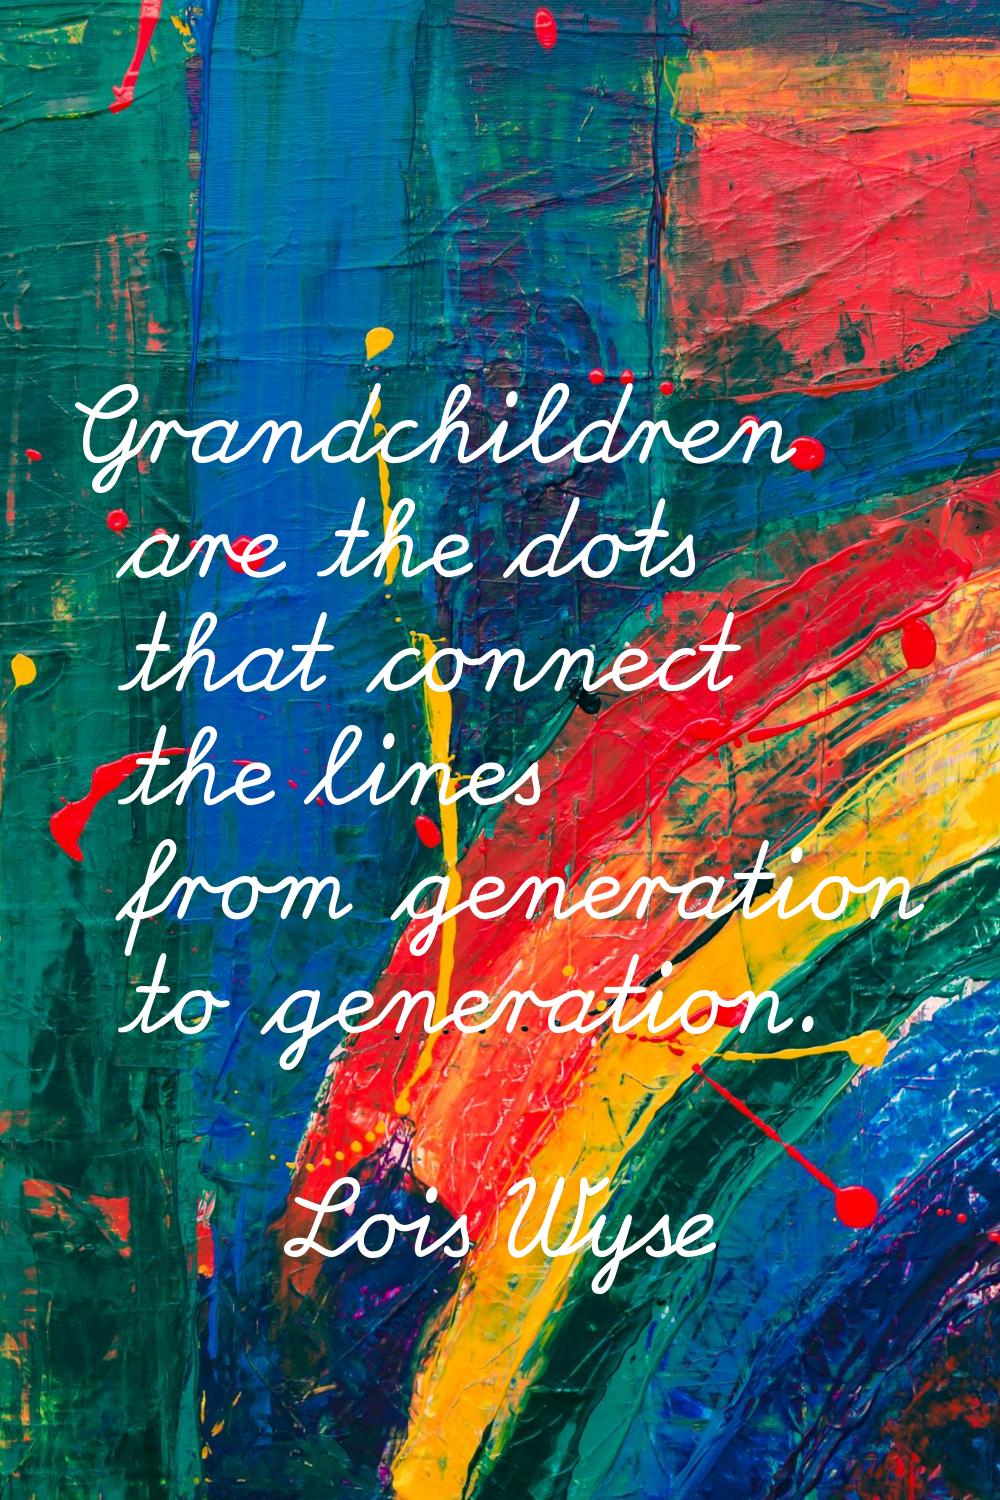 Grandchildren are the dots that connect the lines from generation to generation.